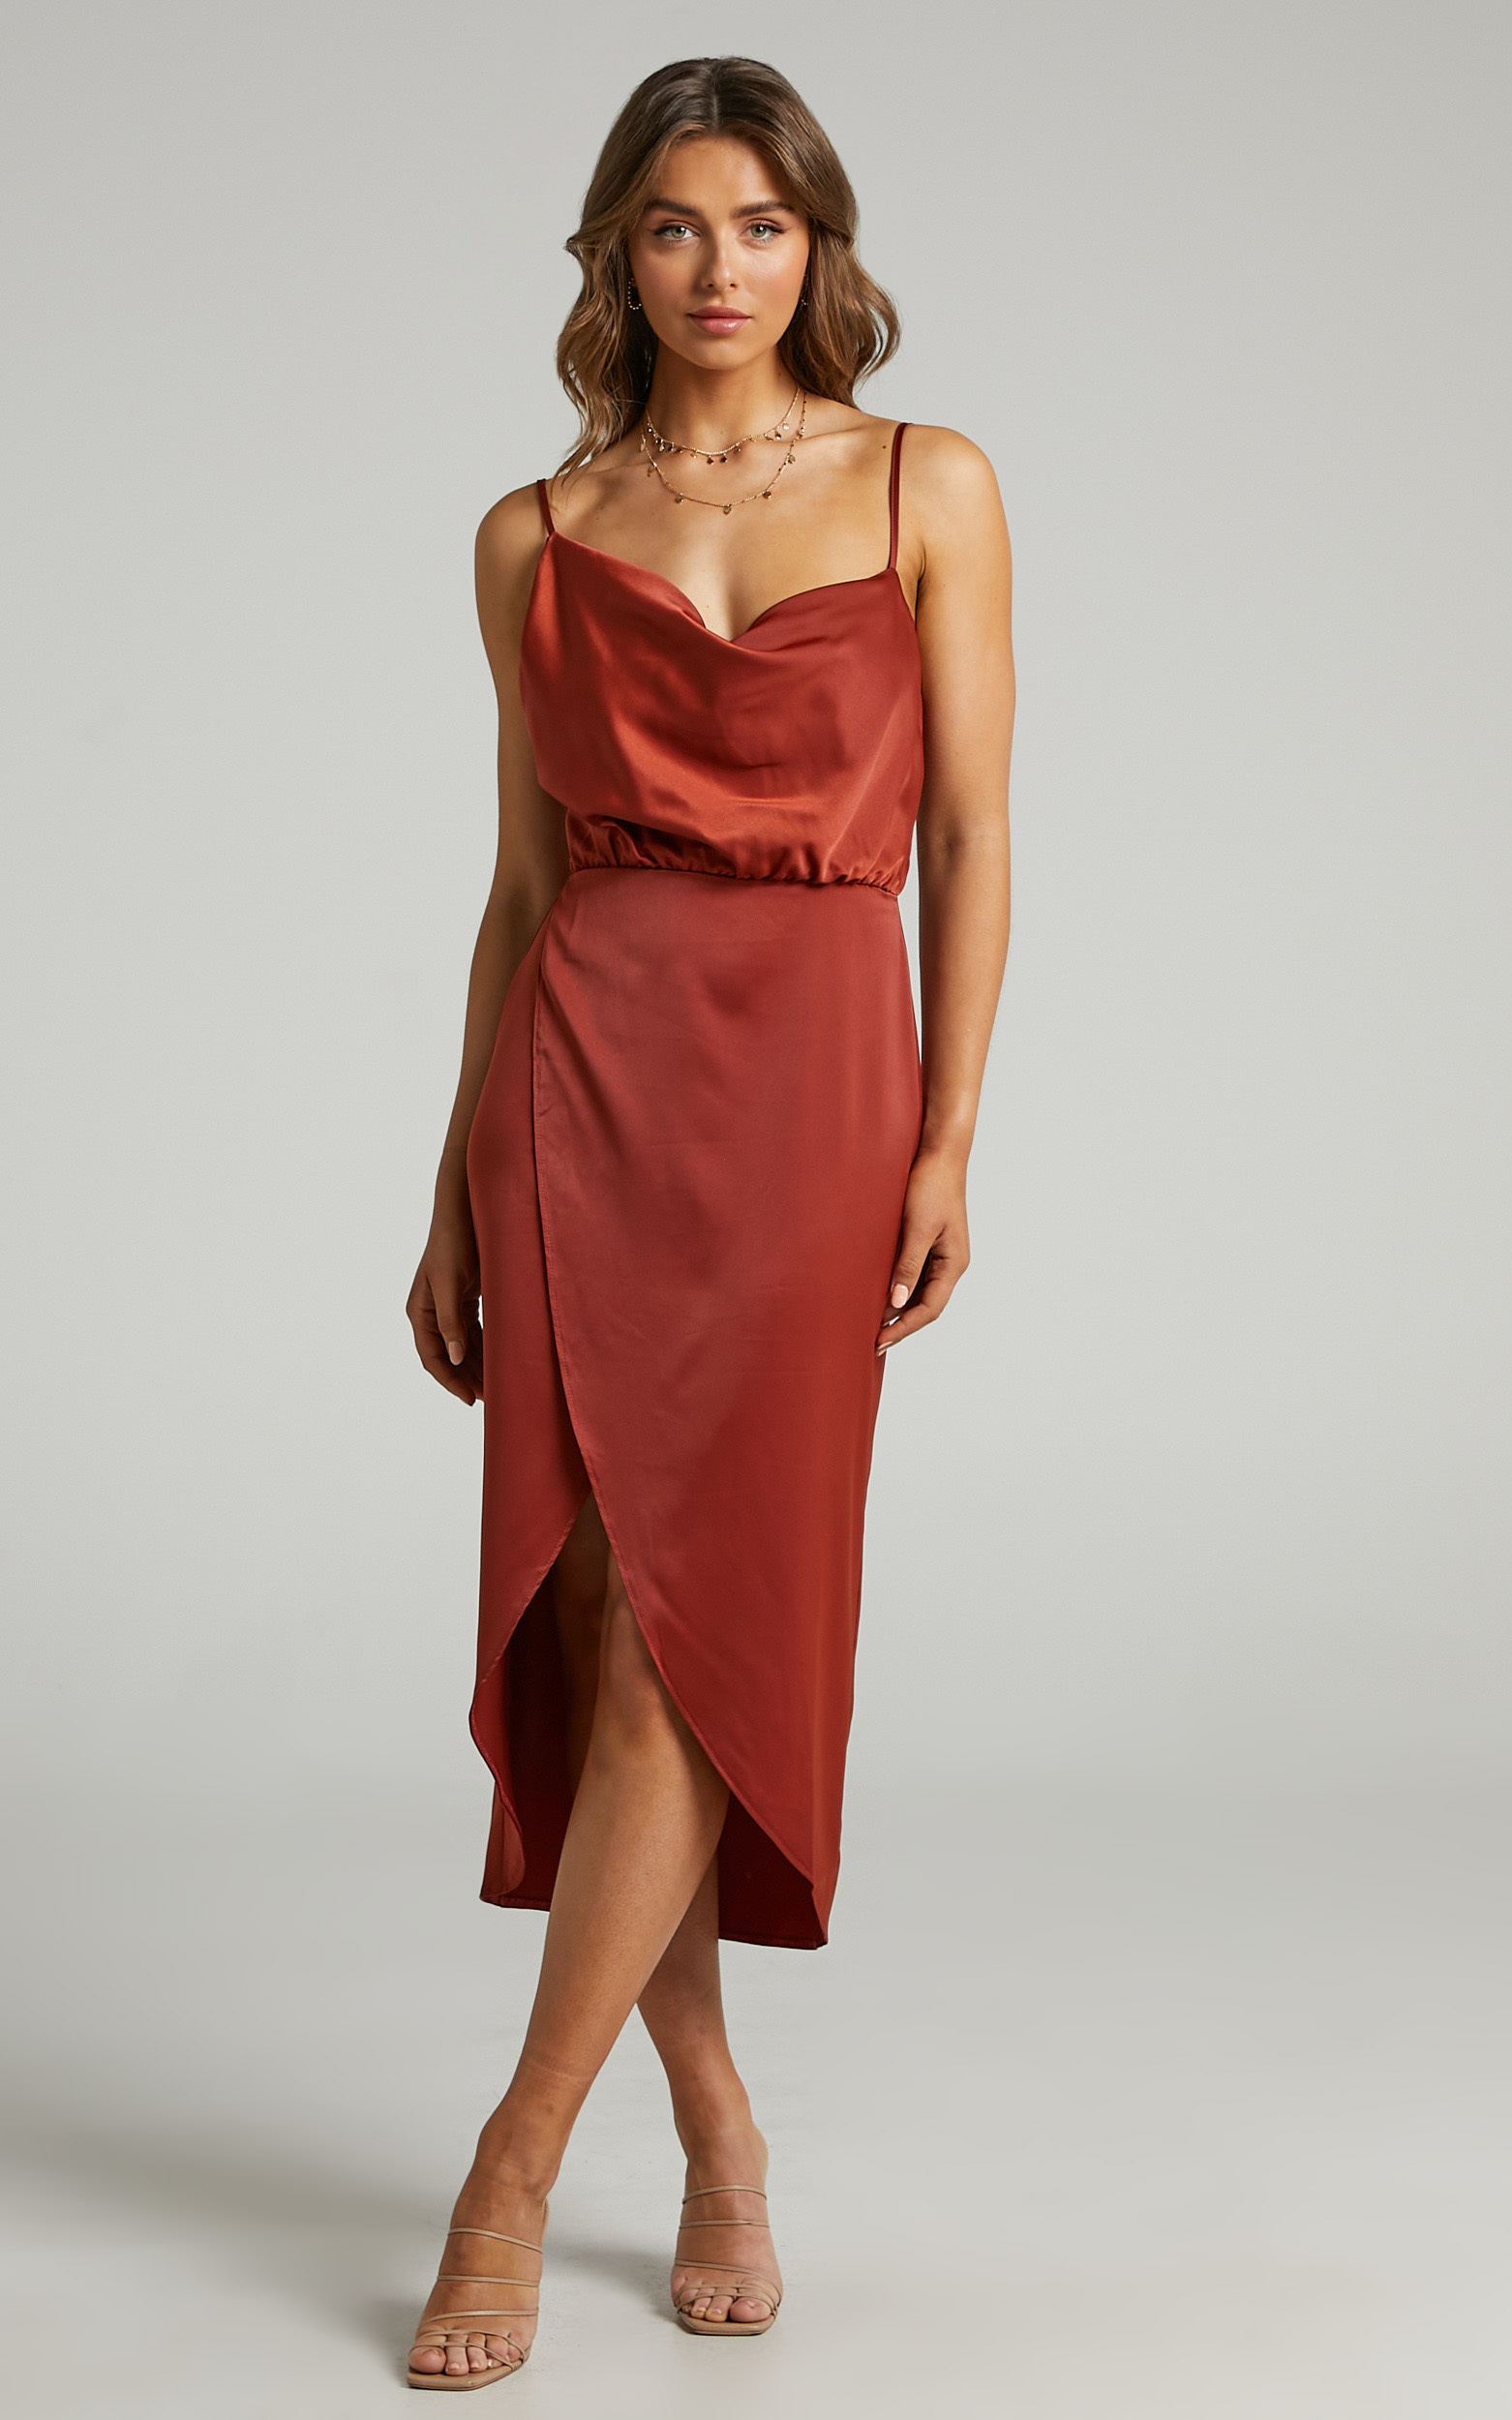 Sisters by Heart Asymmetric Cowl Neck Midi Dress in Copper Satin - 06, BRN1, hi-res image number null